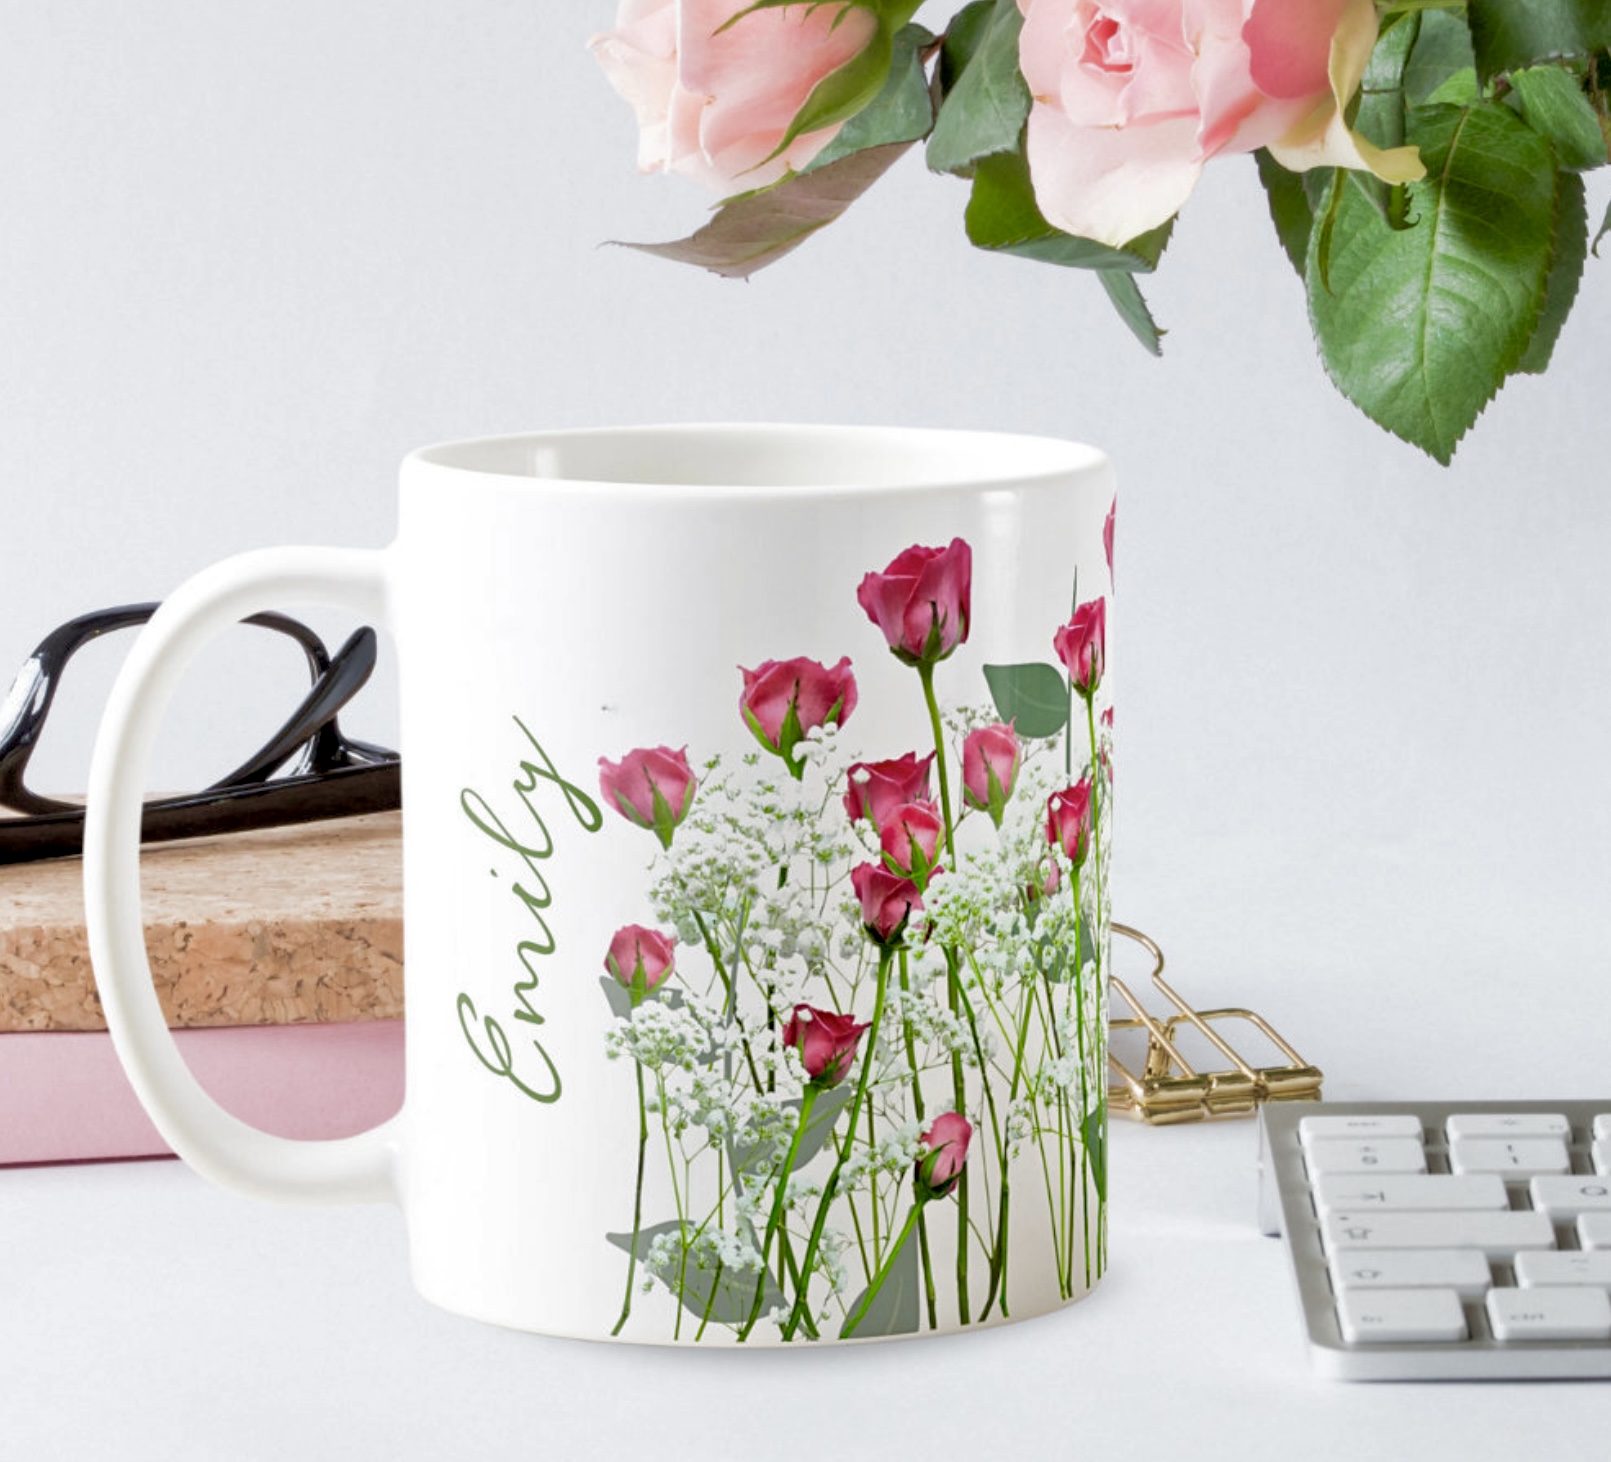 Matching mug with pink roses and small white flowers with inspirational message.